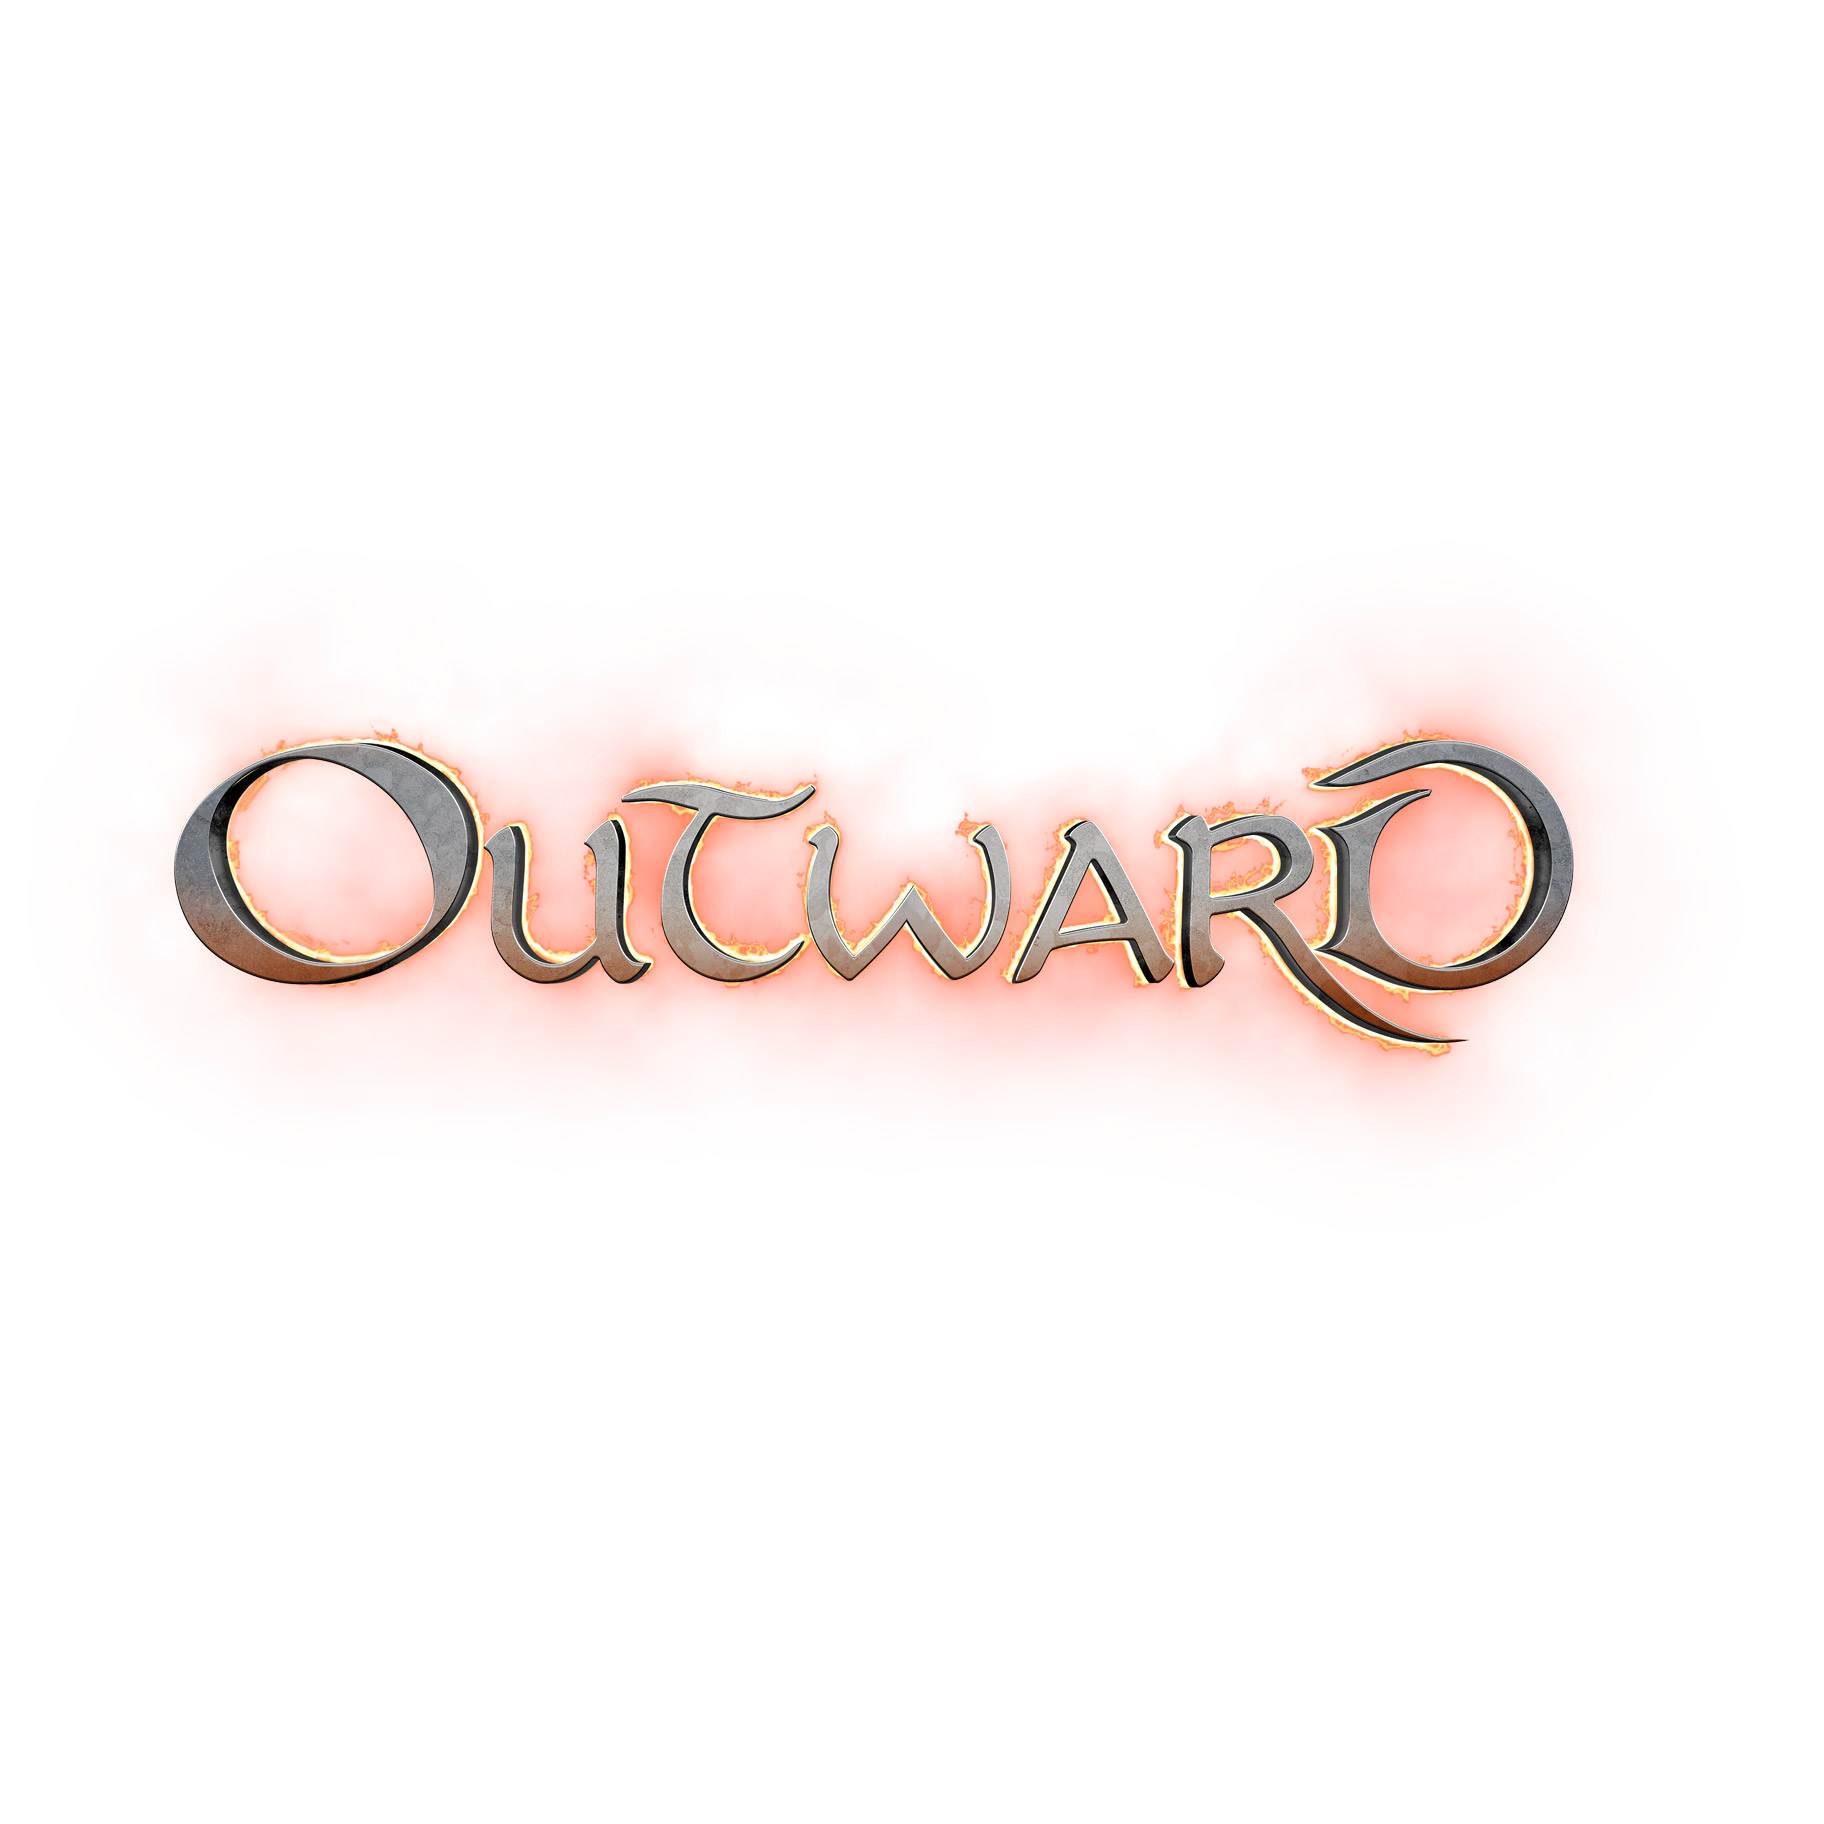 Outward 【PS4ゲームソフト】_1